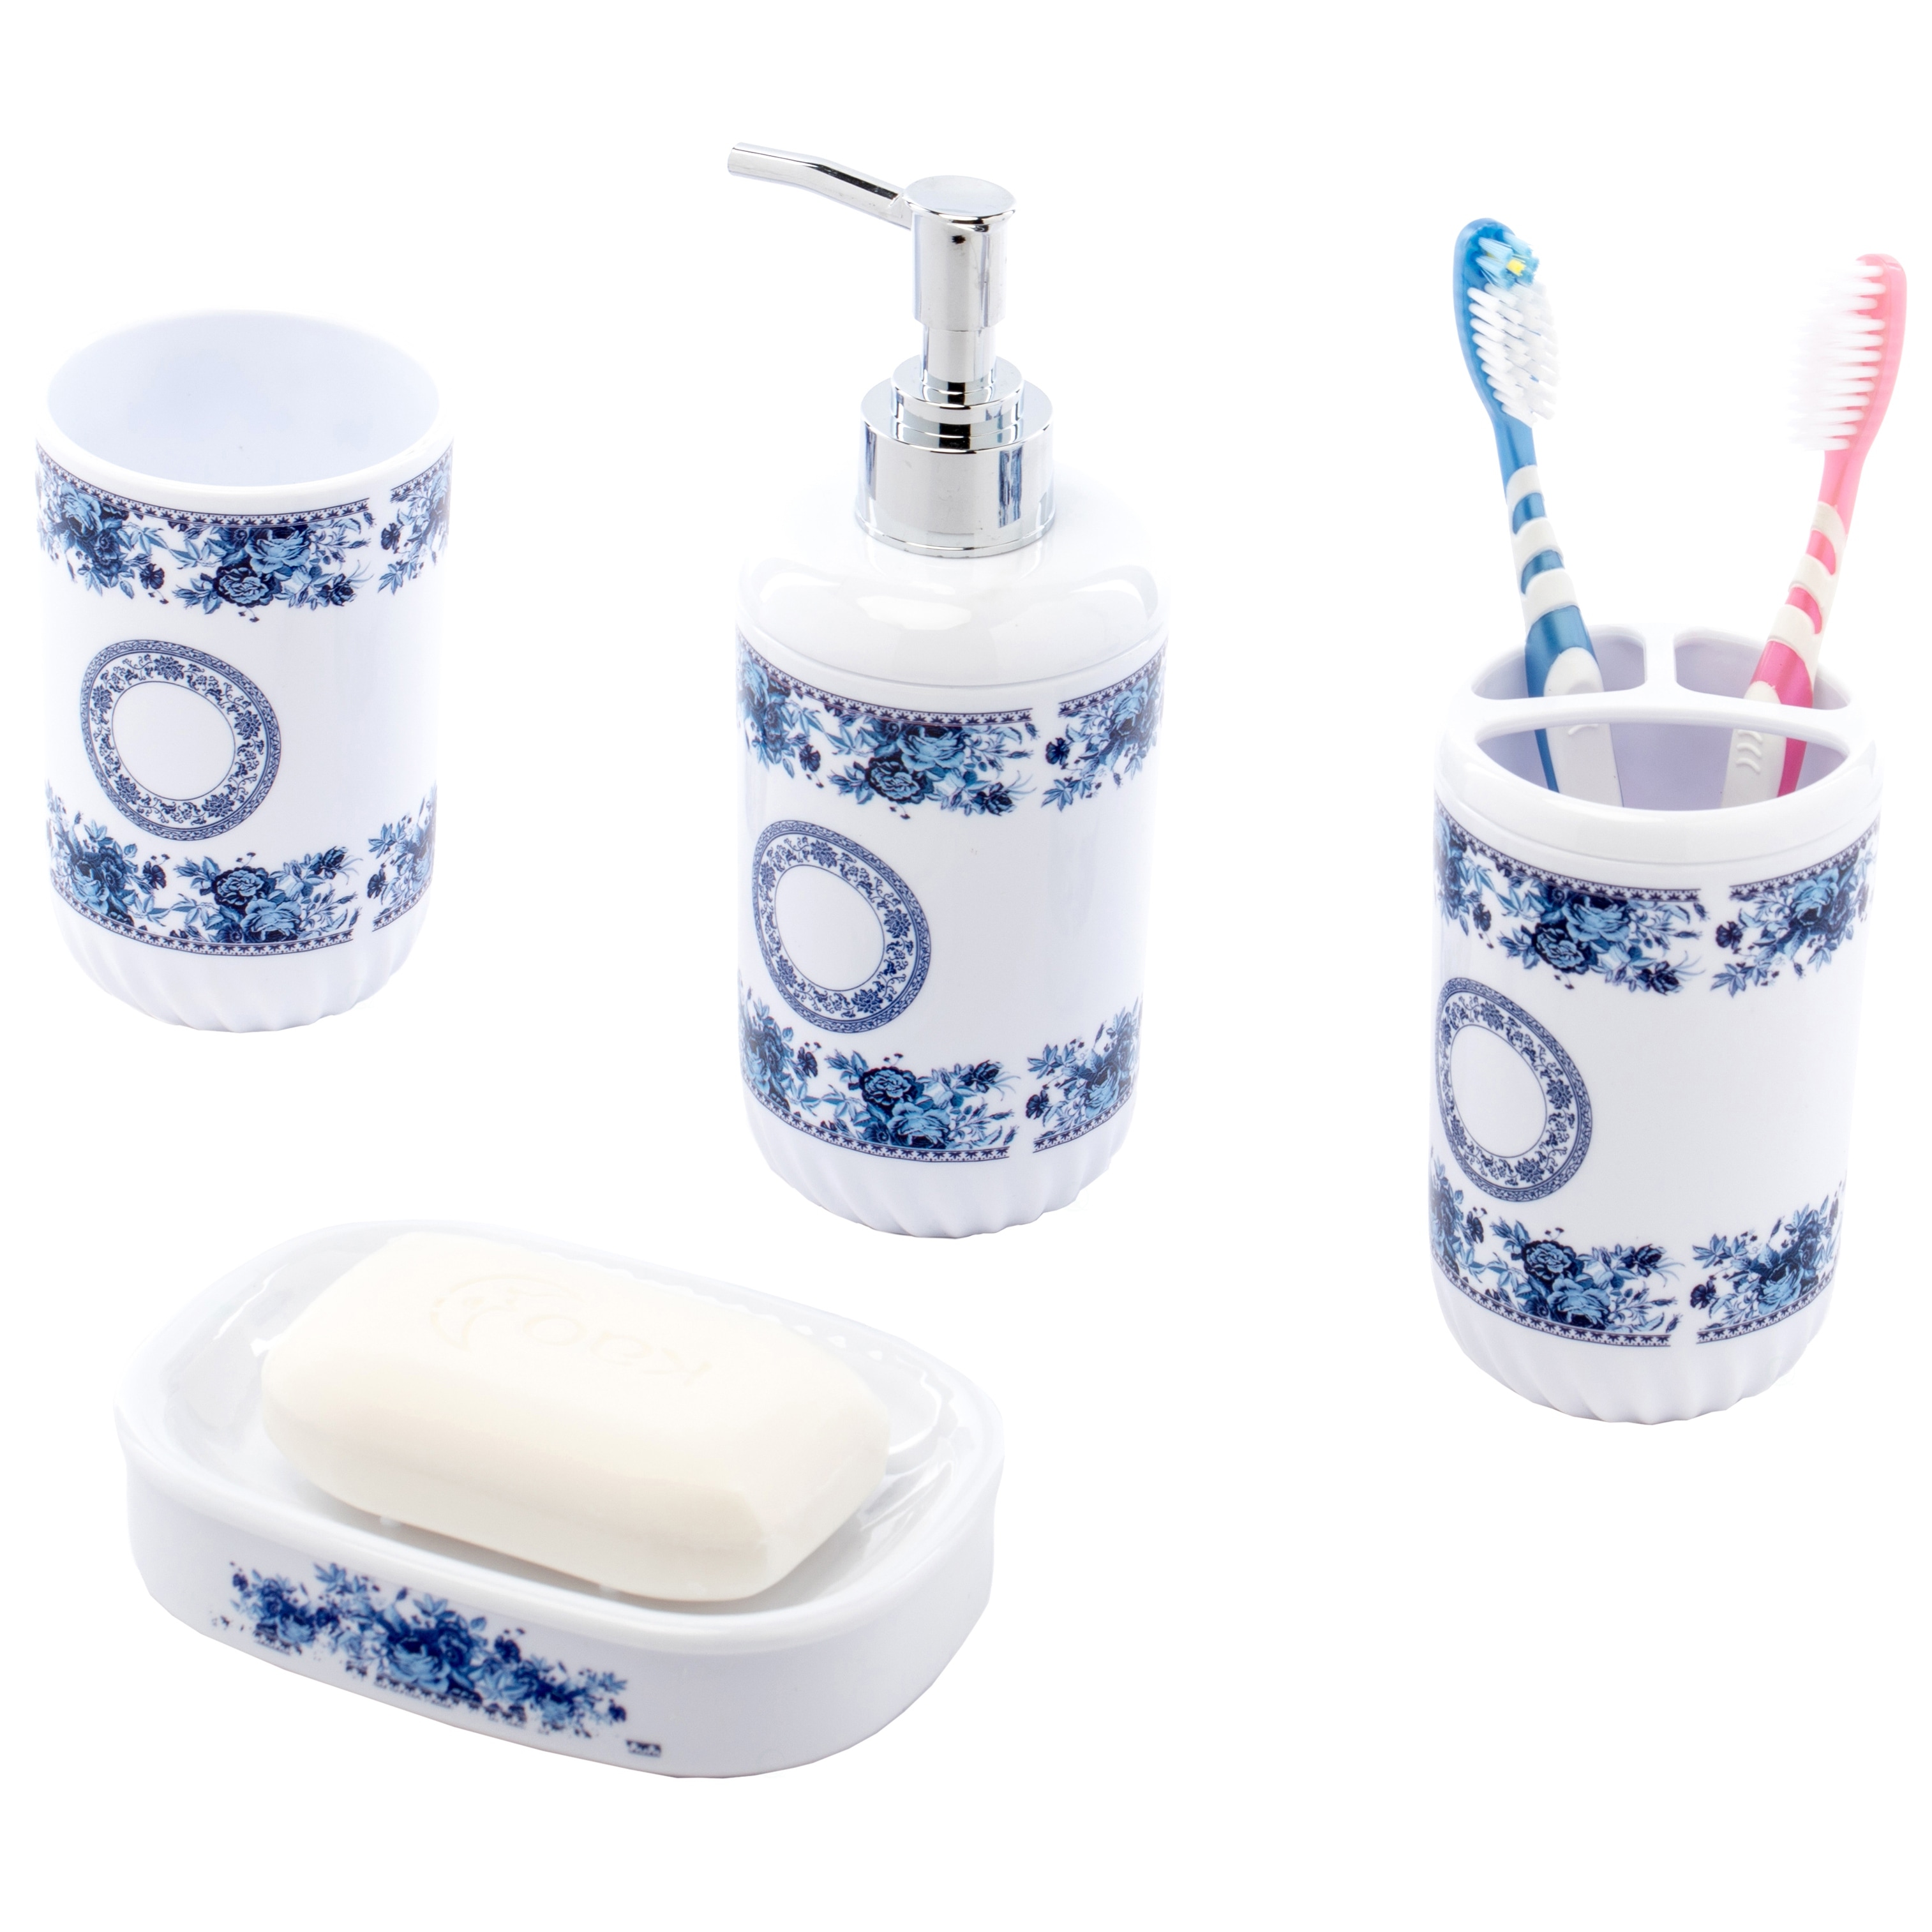 Details about   5PCS Bathroom Accessory Set  Leaf Resin Wash Cup ToothBrush Holder Soap Dish Kit 